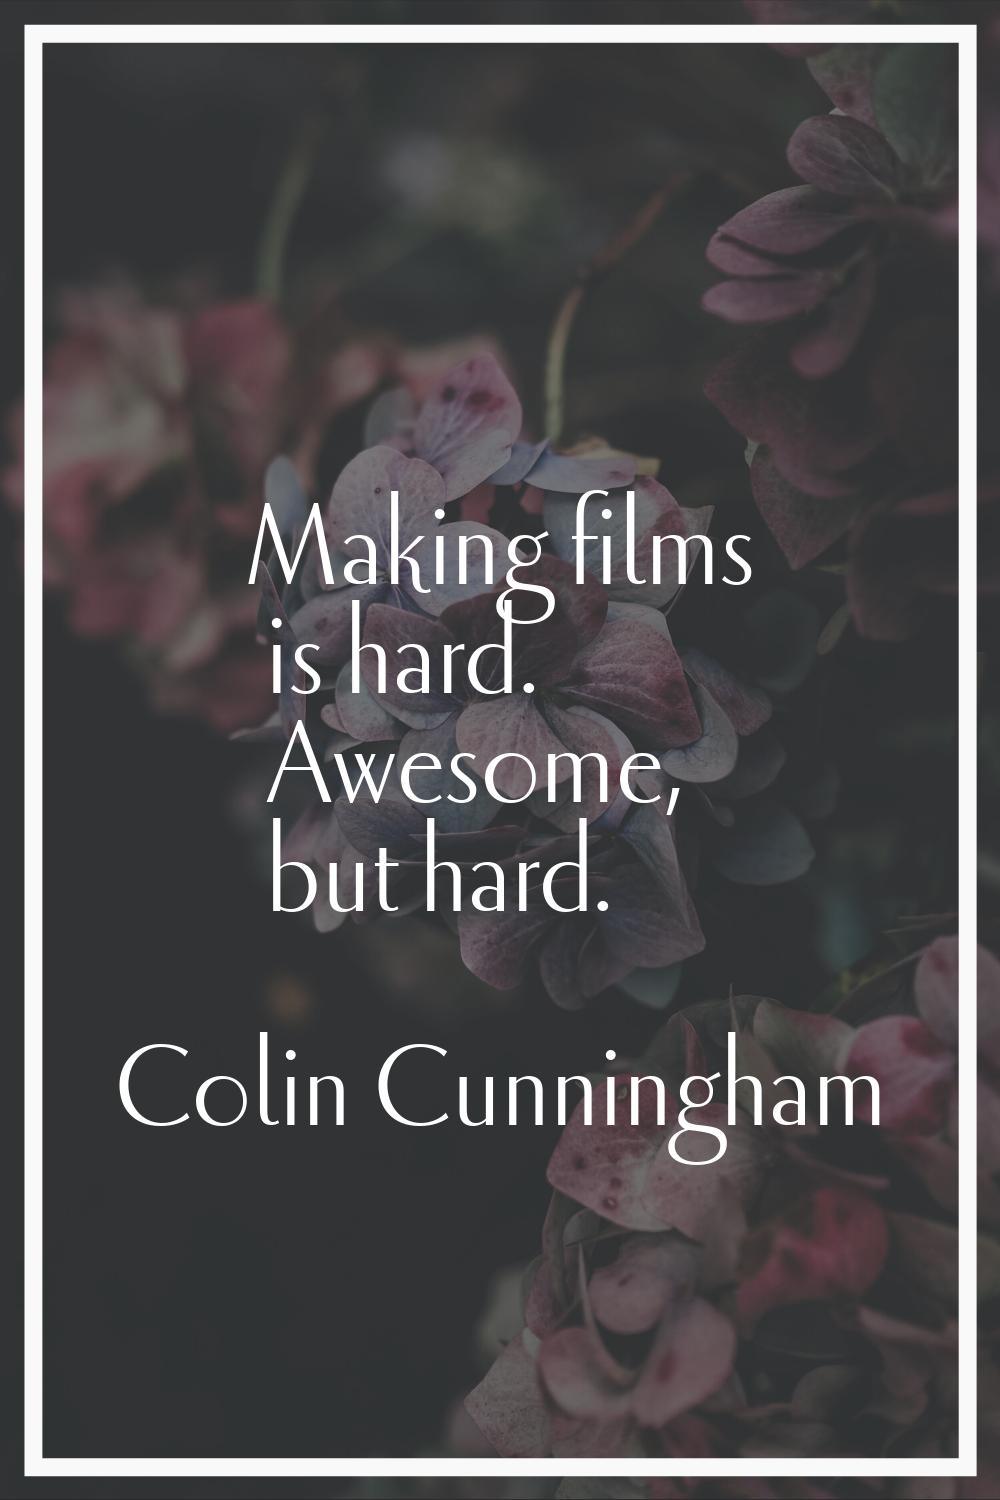 Making films is hard. Awesome, but hard.